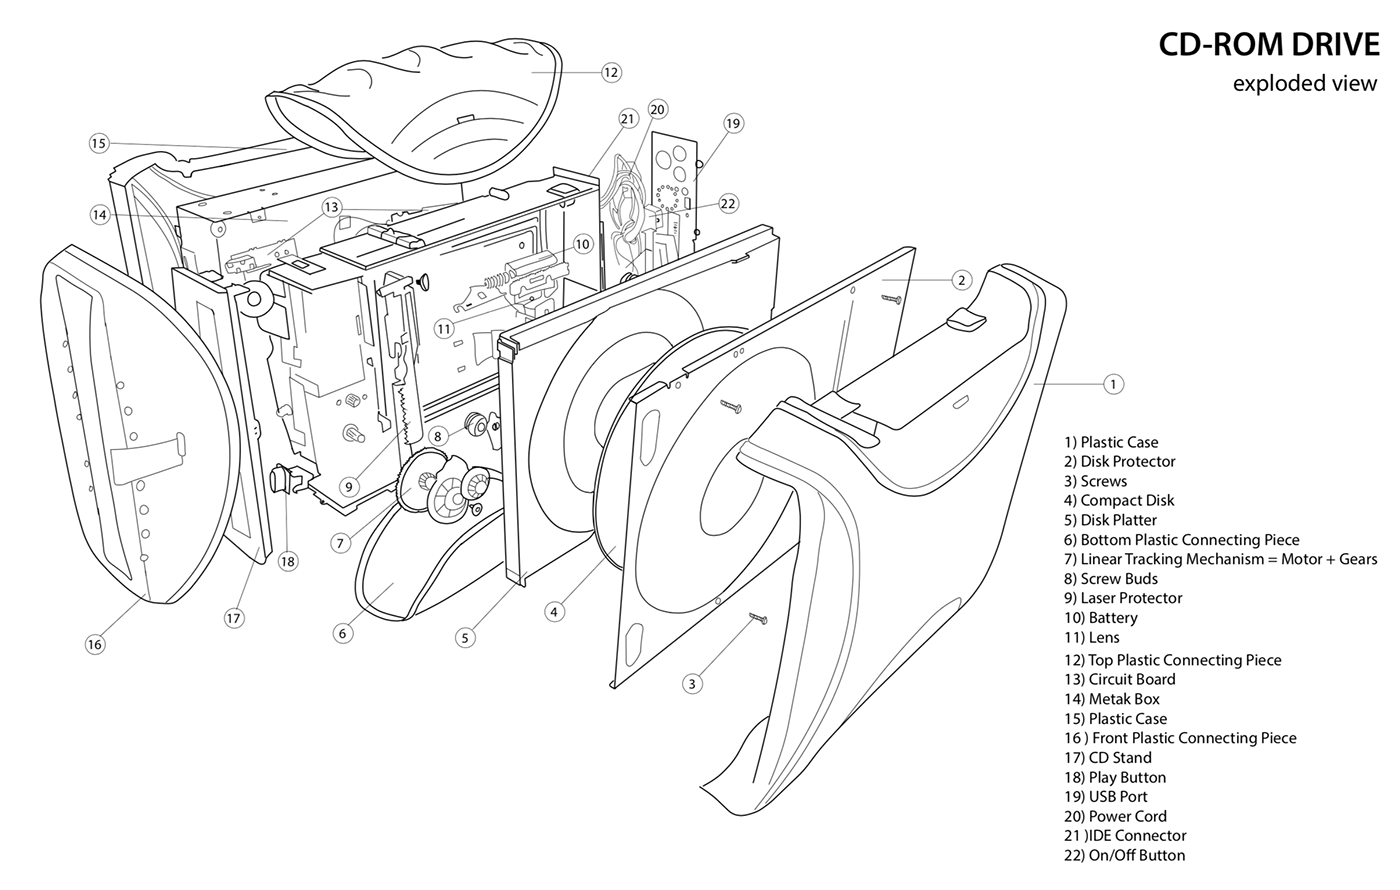 technical drawing Exploded view cd-rom Before After Label sculpture exploded model mechanics Blueprint